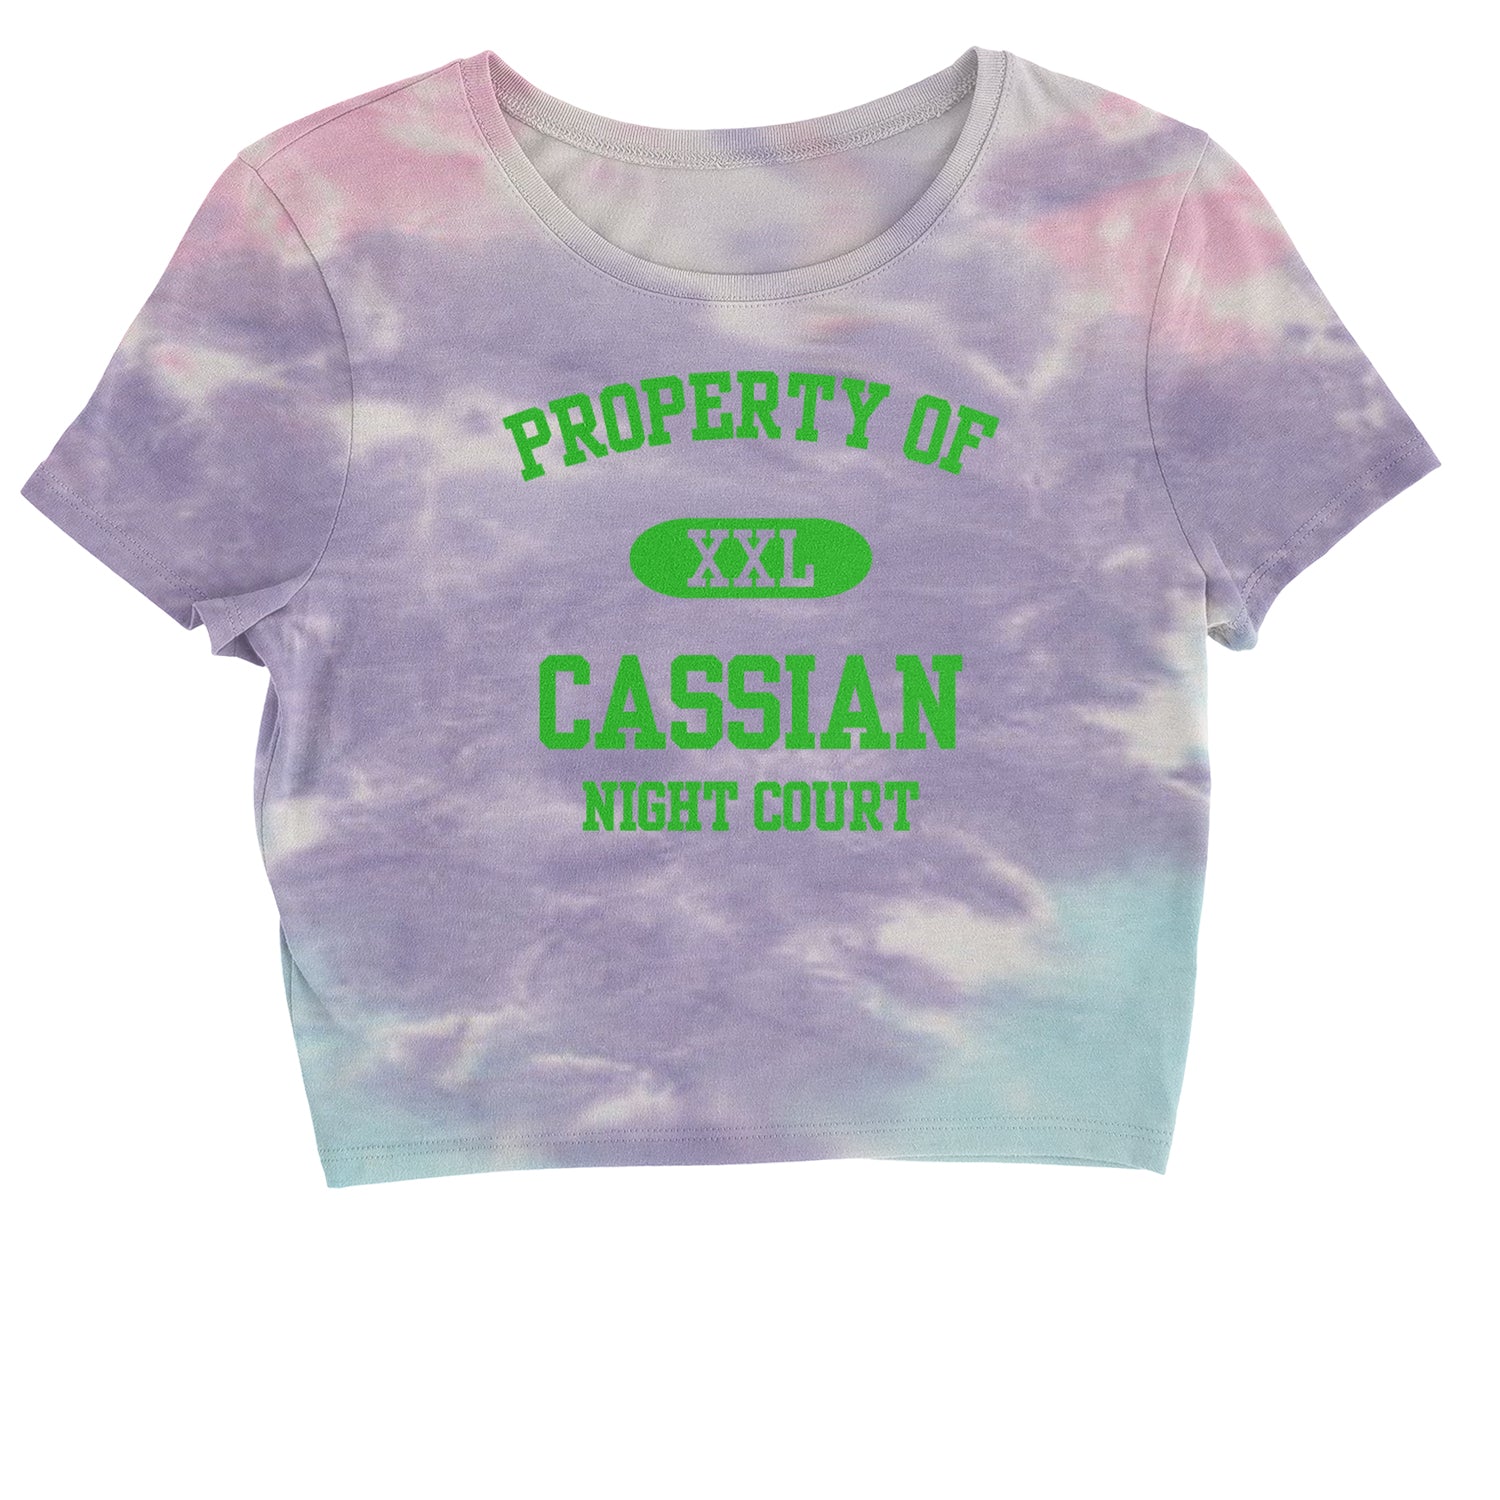 Property Of Cassian ACOTAR Cropped T-Shirt acotar, court, maas, tamlin, thorns by Expression Tees